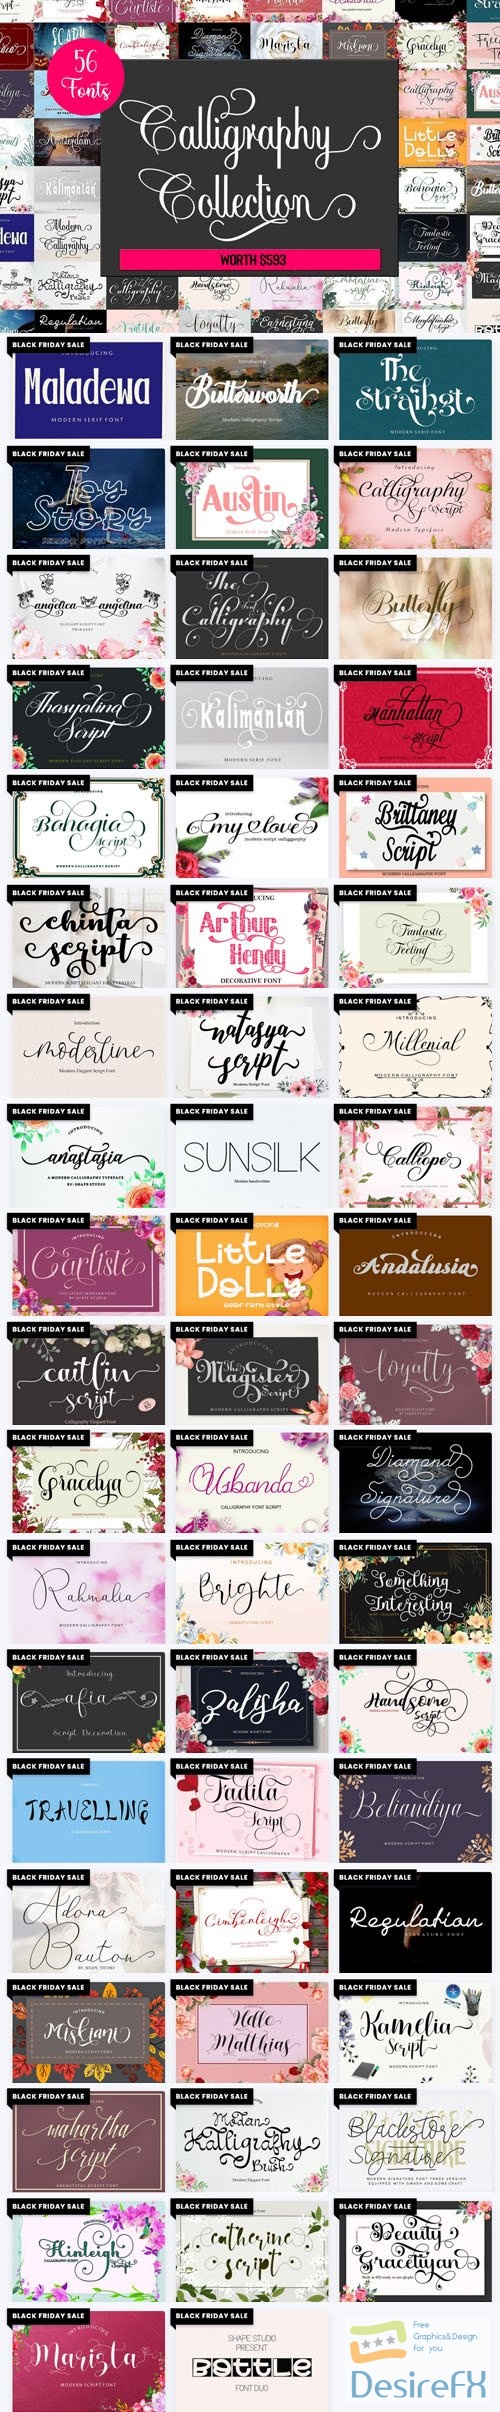 Calligraphy Fonts Collection - 56 Premium Fonts Worth $593